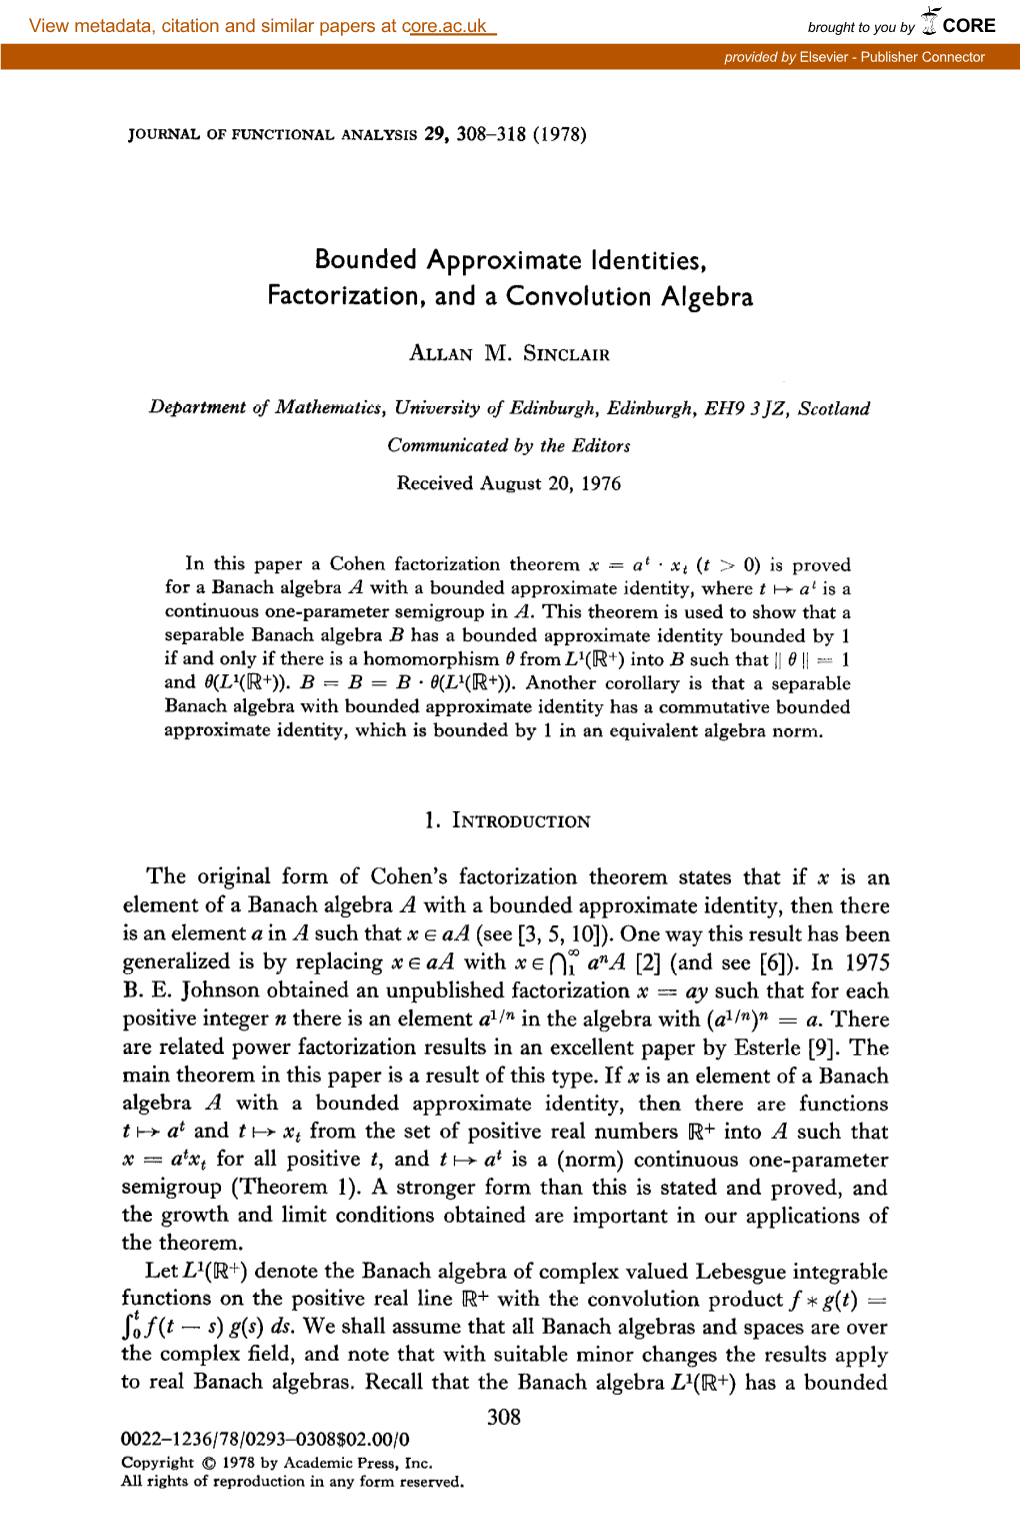 Bounded Approximate Identities, Factorization, and a Convolution Algebra